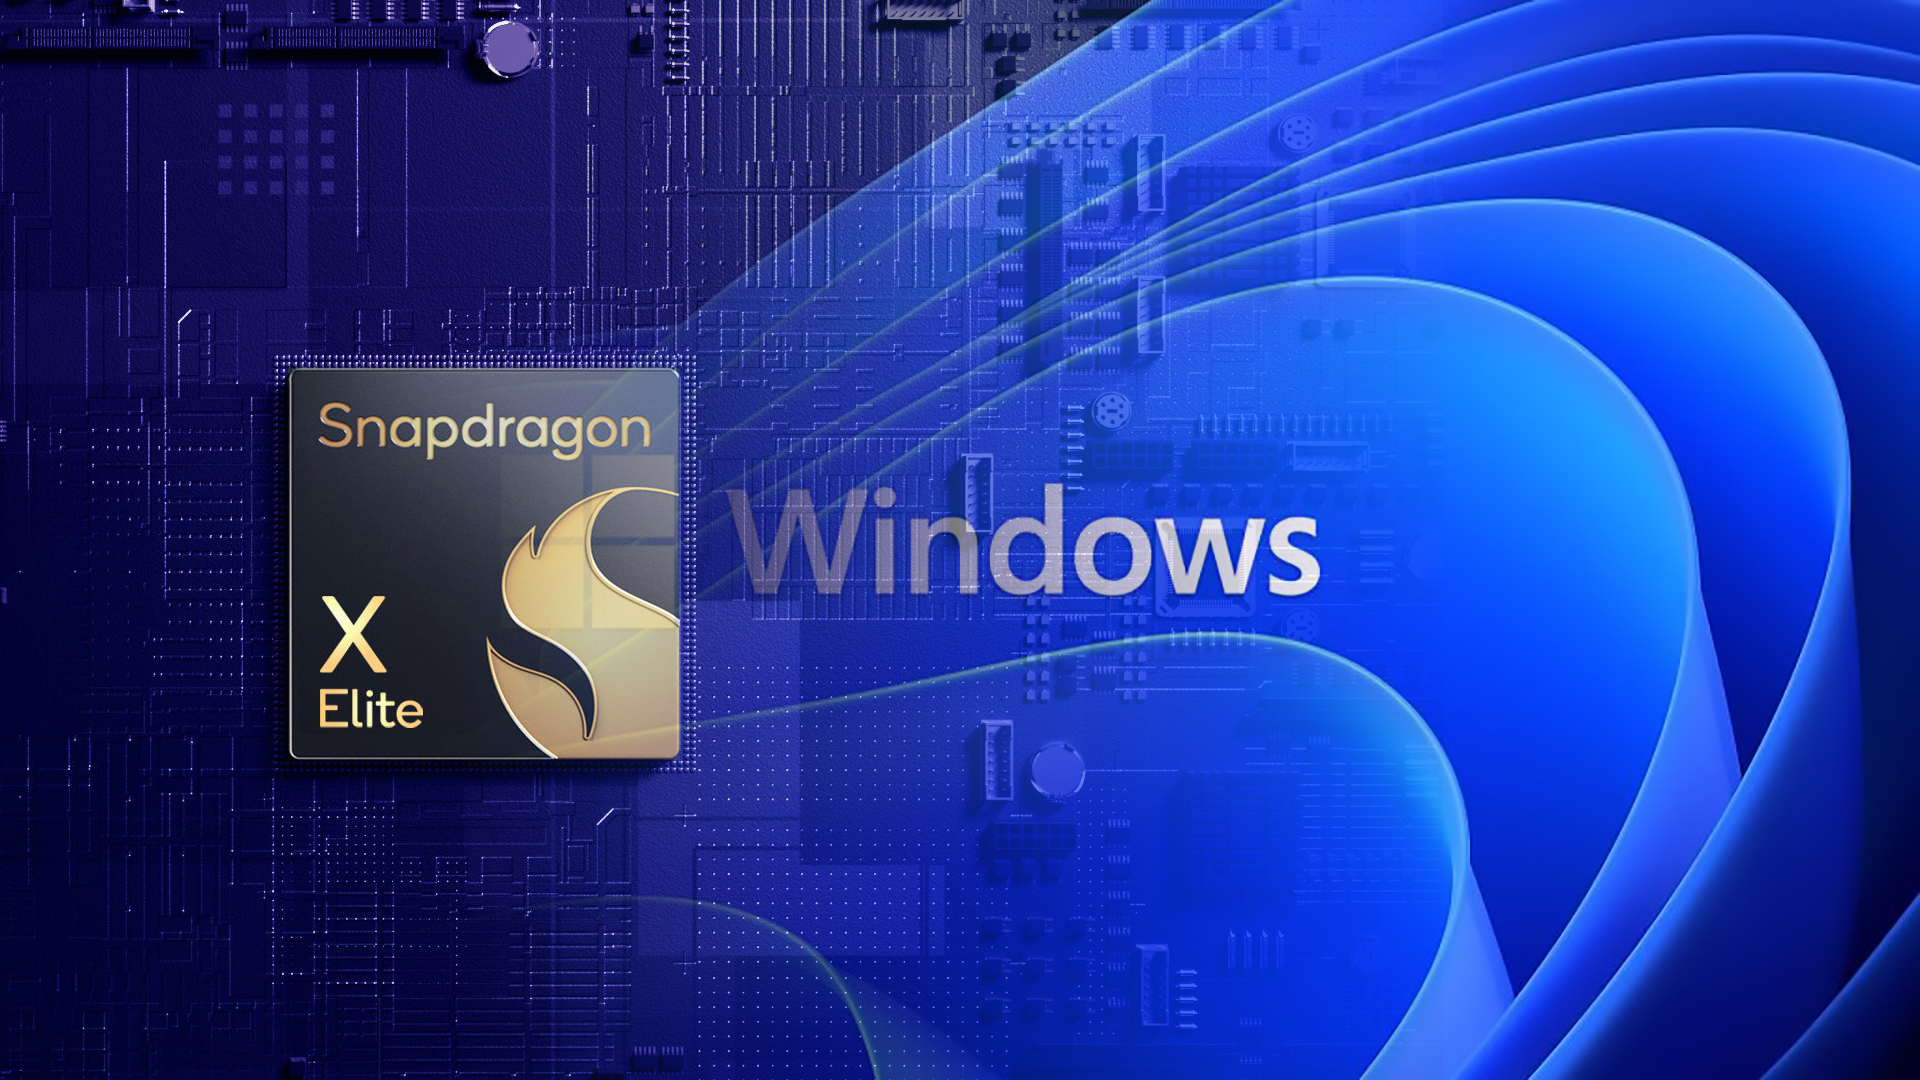 Qualcomm exclusive for the Windows on ARM platform will only last until the end of the year